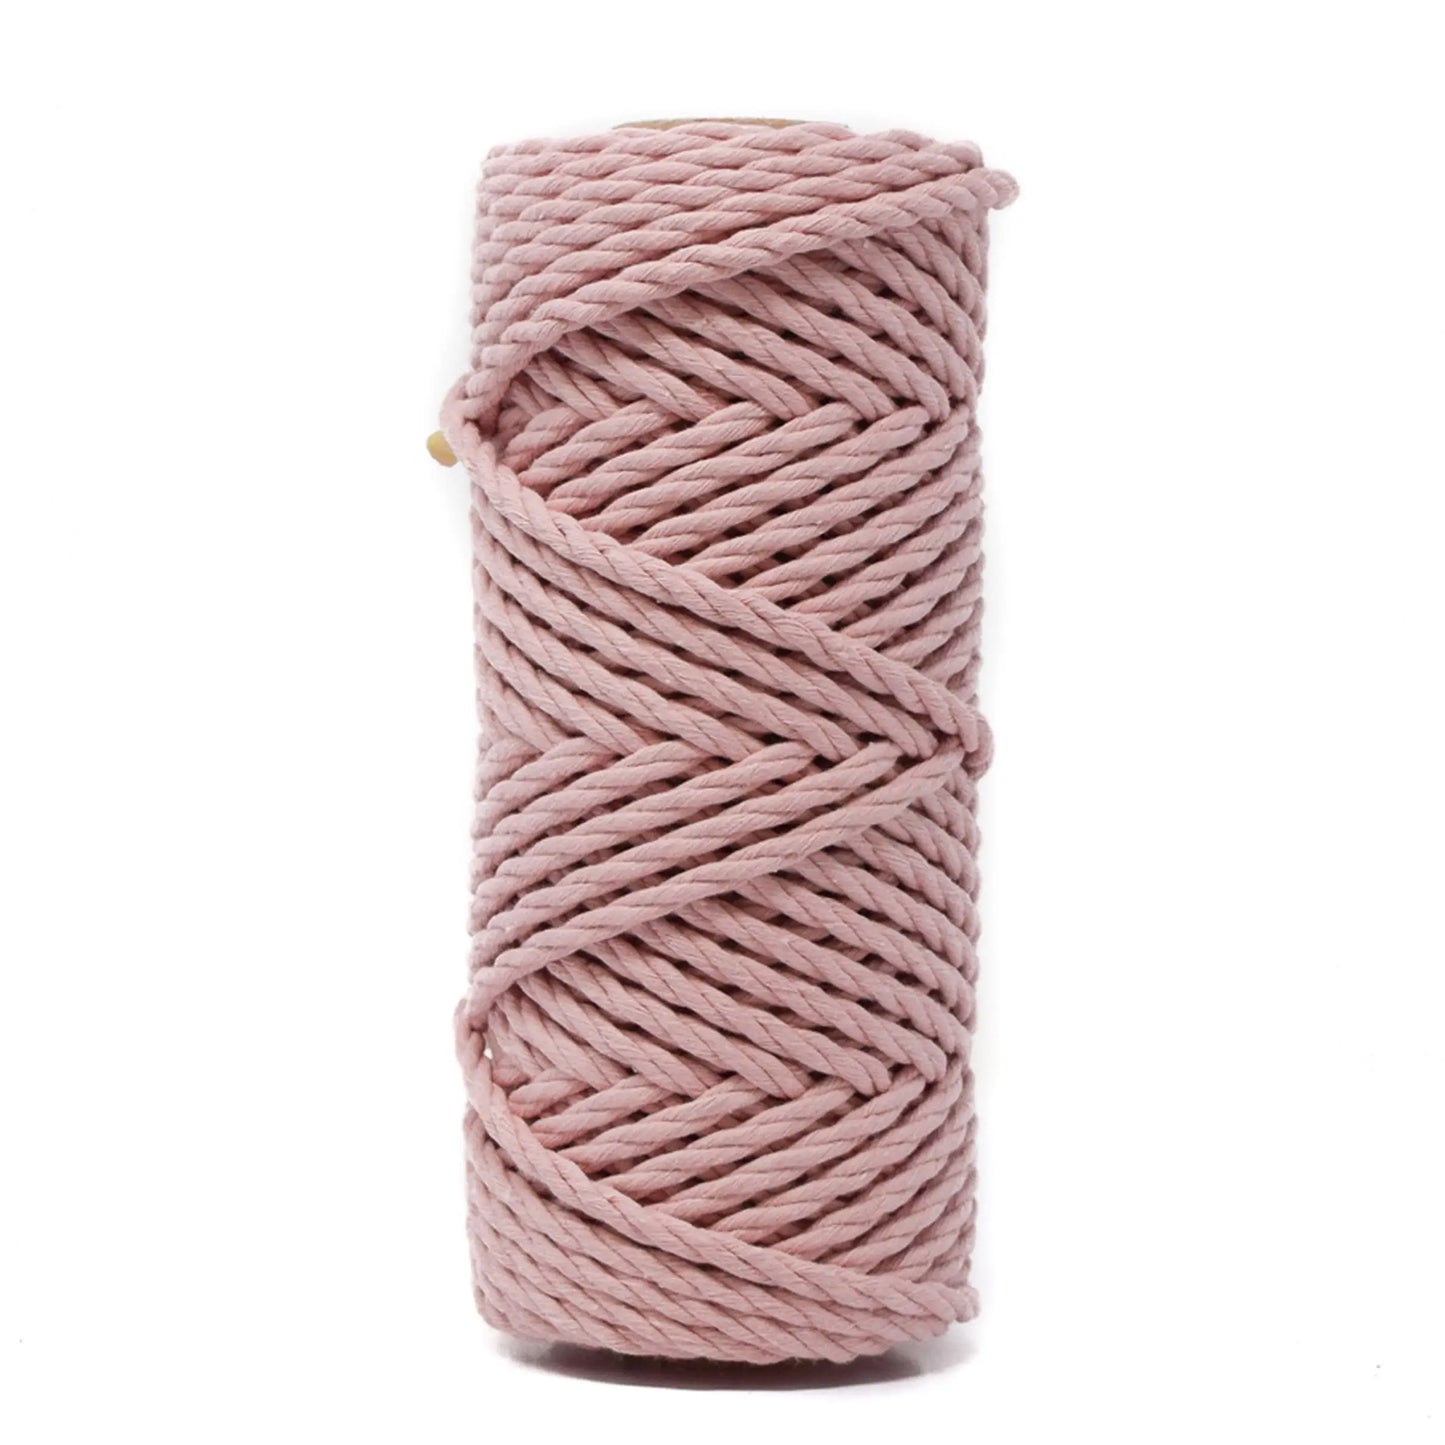 NEW // 3 Ply Recycled Cotton Rope - 5 Mm - 50 yd